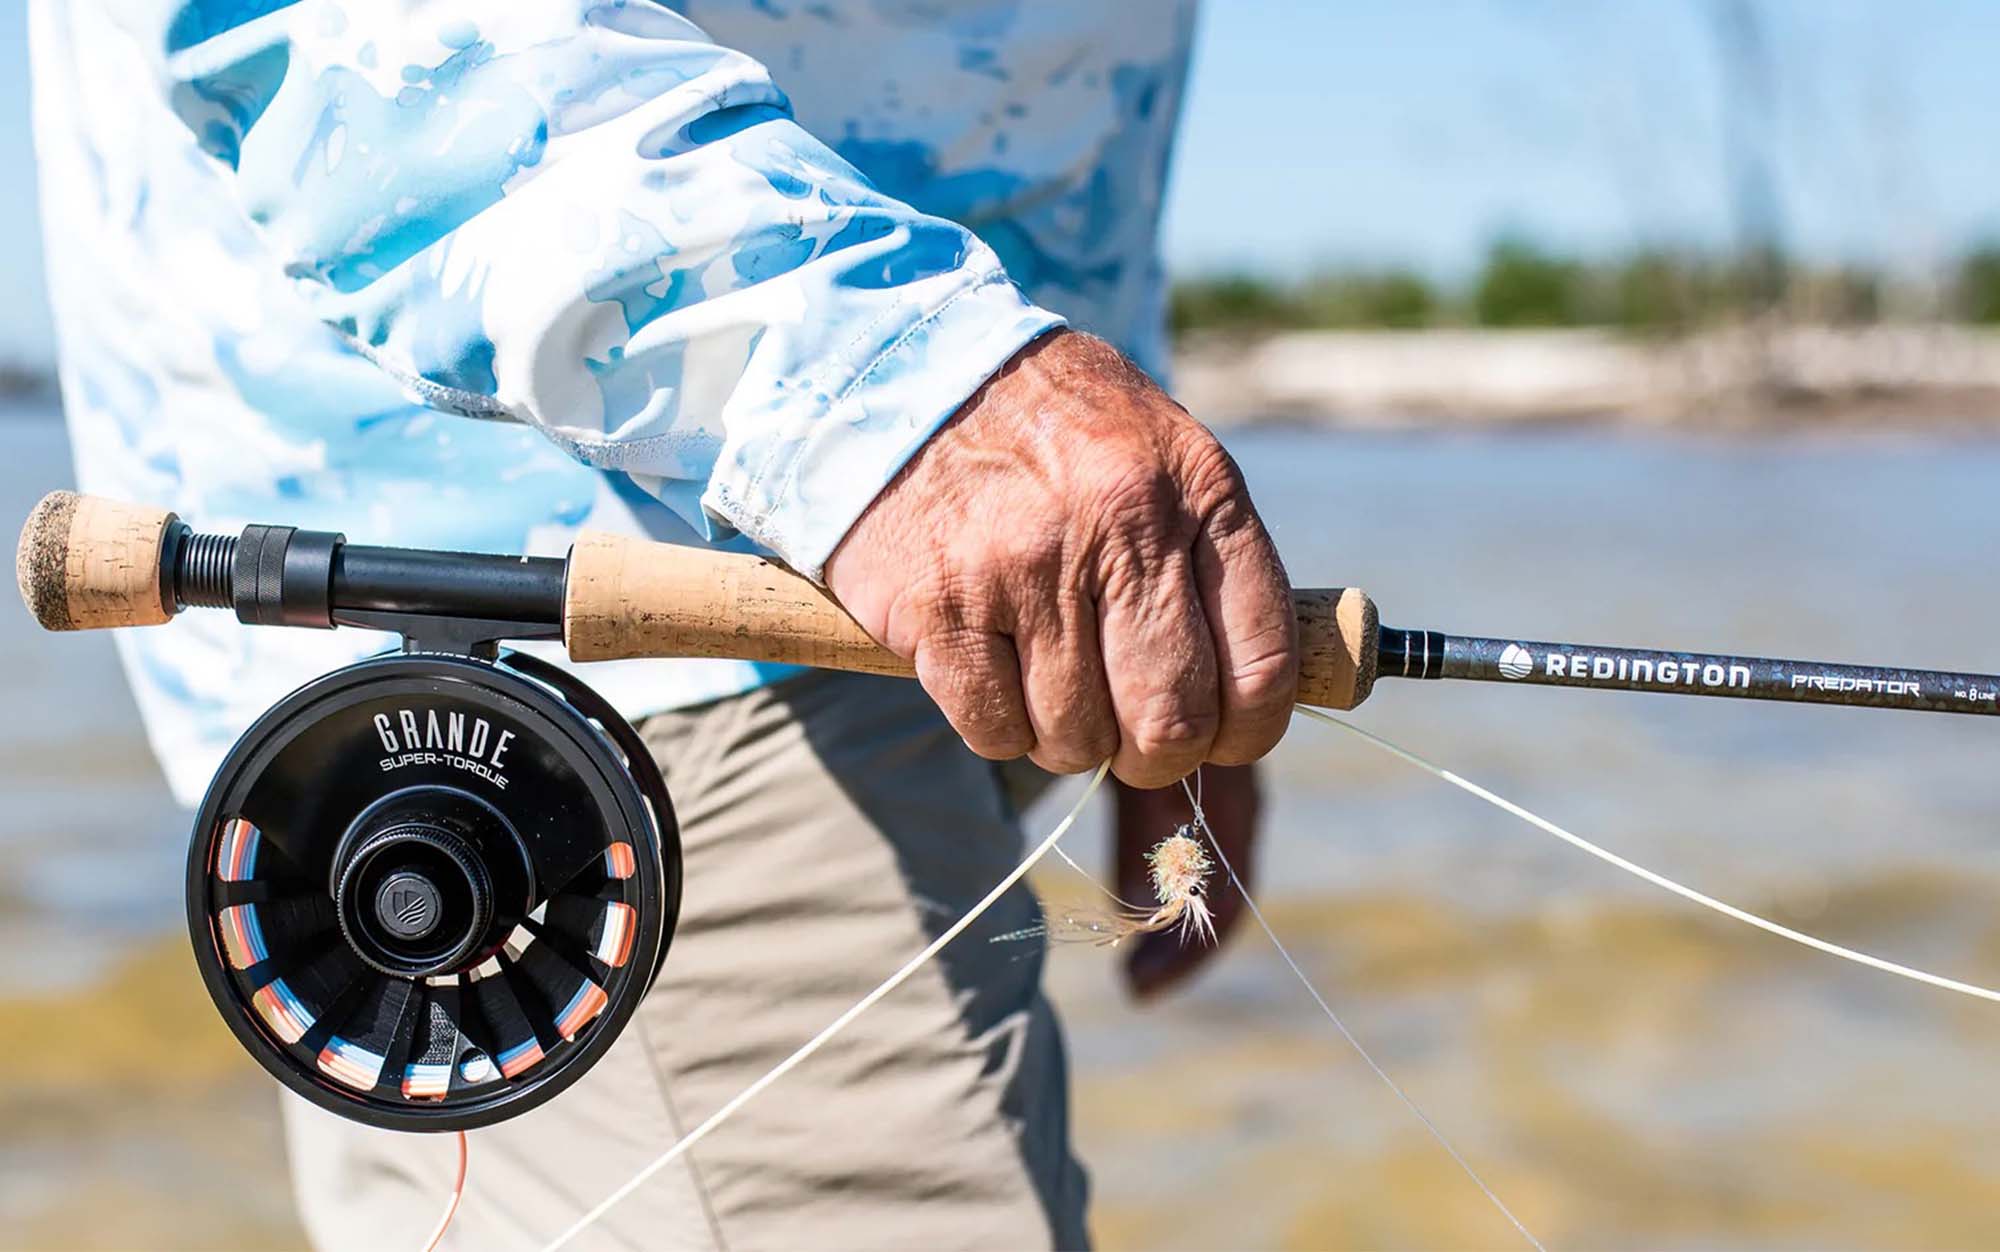 Fly Rods for Sale, High-end Fresh/Saltwater Fly Fishing Rods- Piscifun